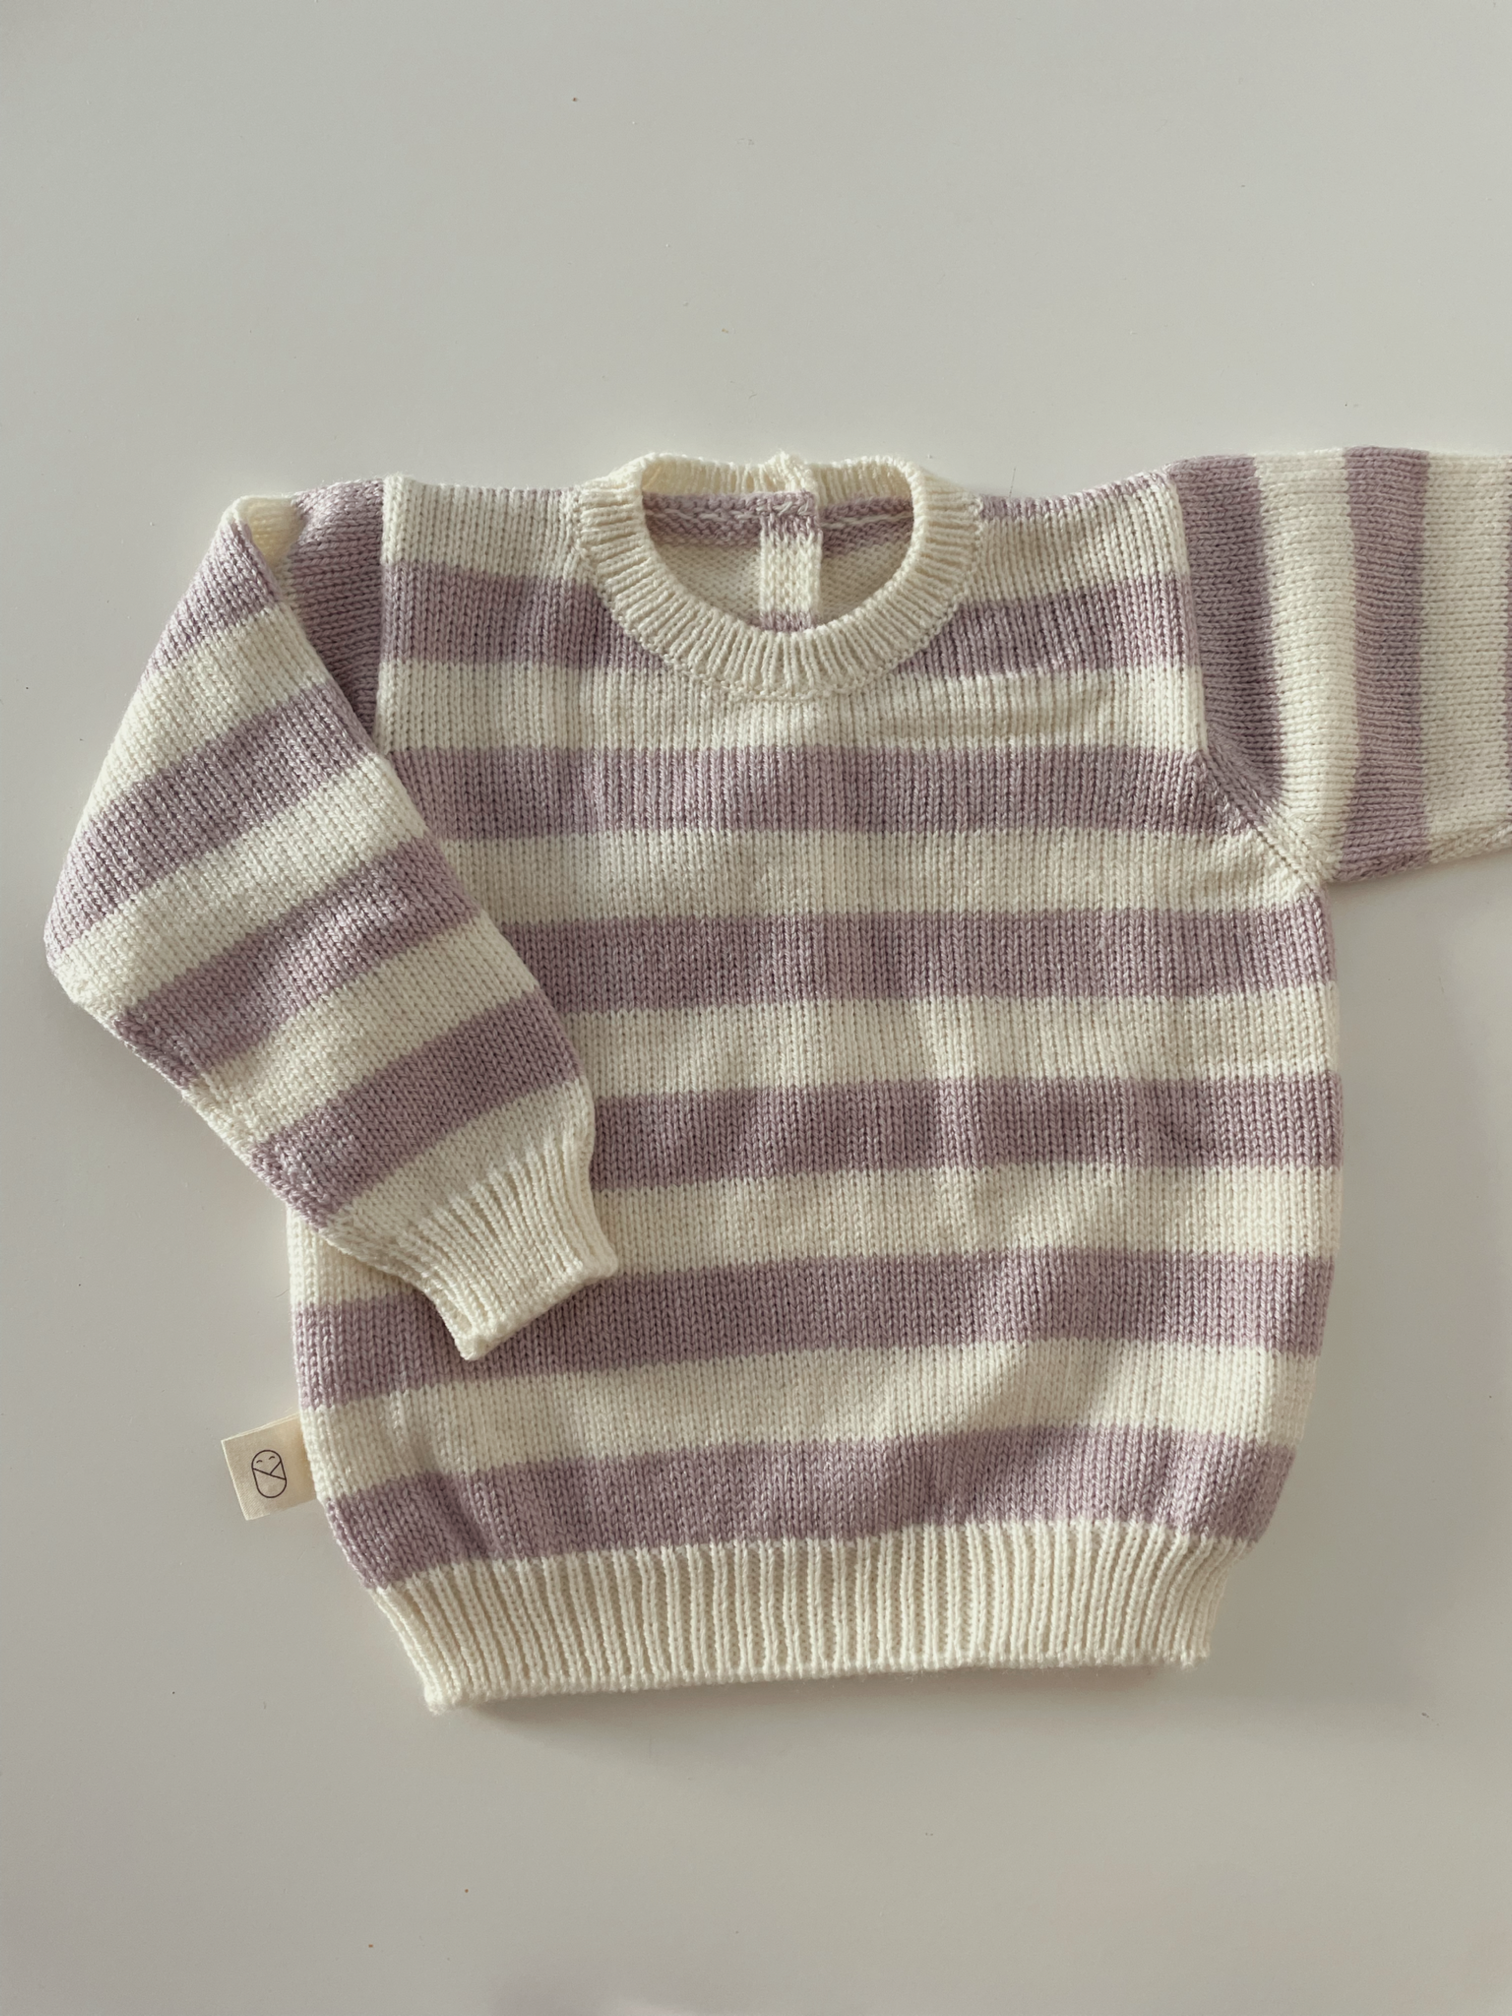 Manel stripped sweater pre order